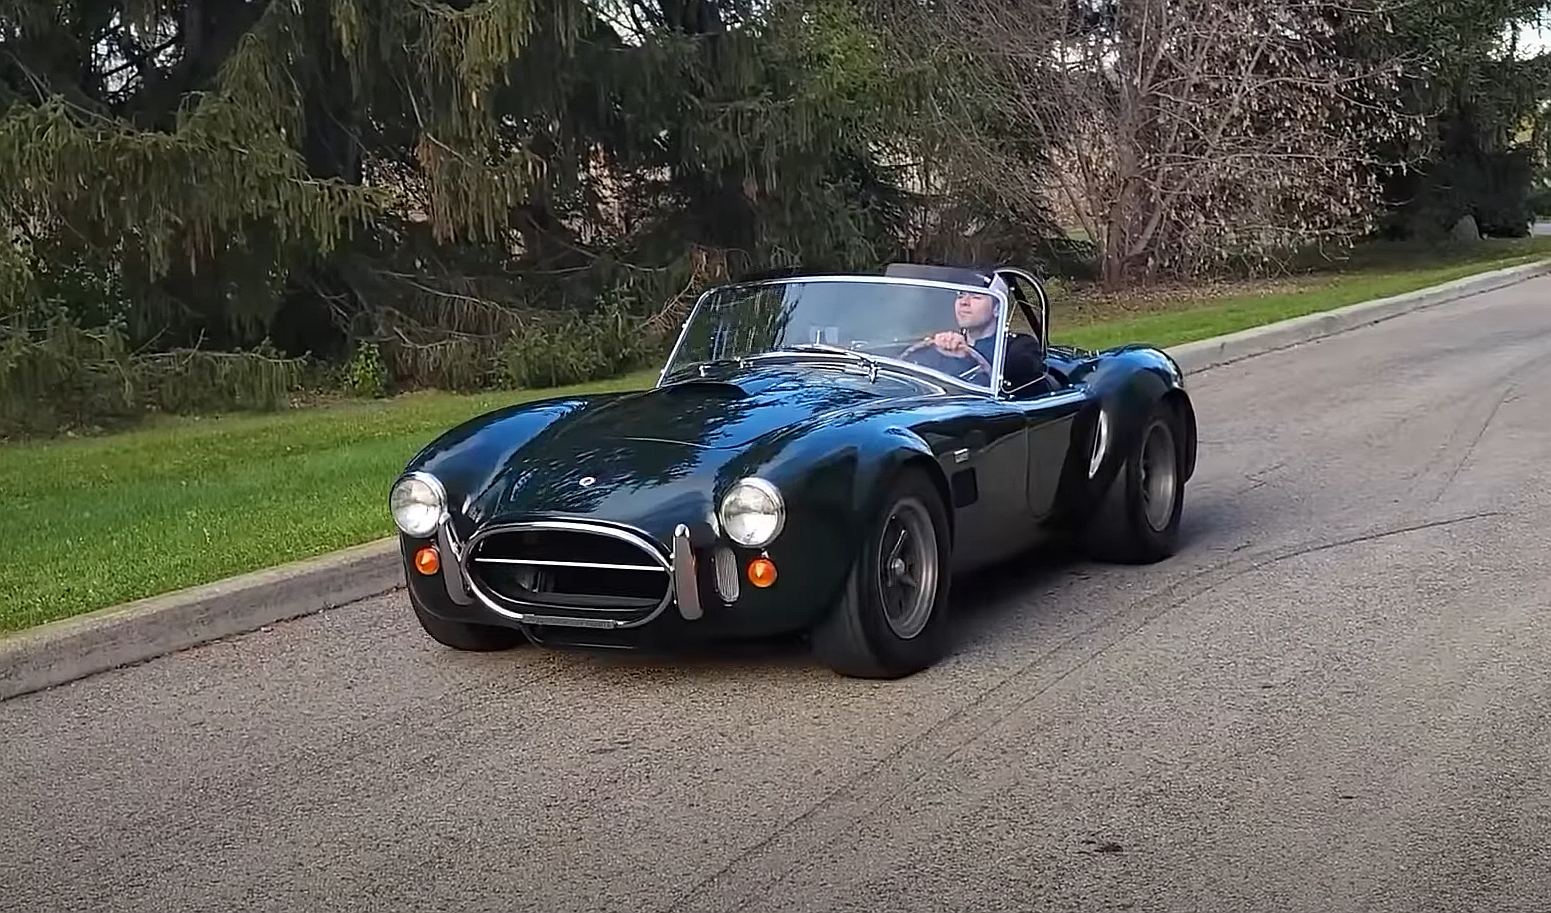 The Rarest Shelby Cobra 427 Ever Built Goes Out for a Spin, Flexes 